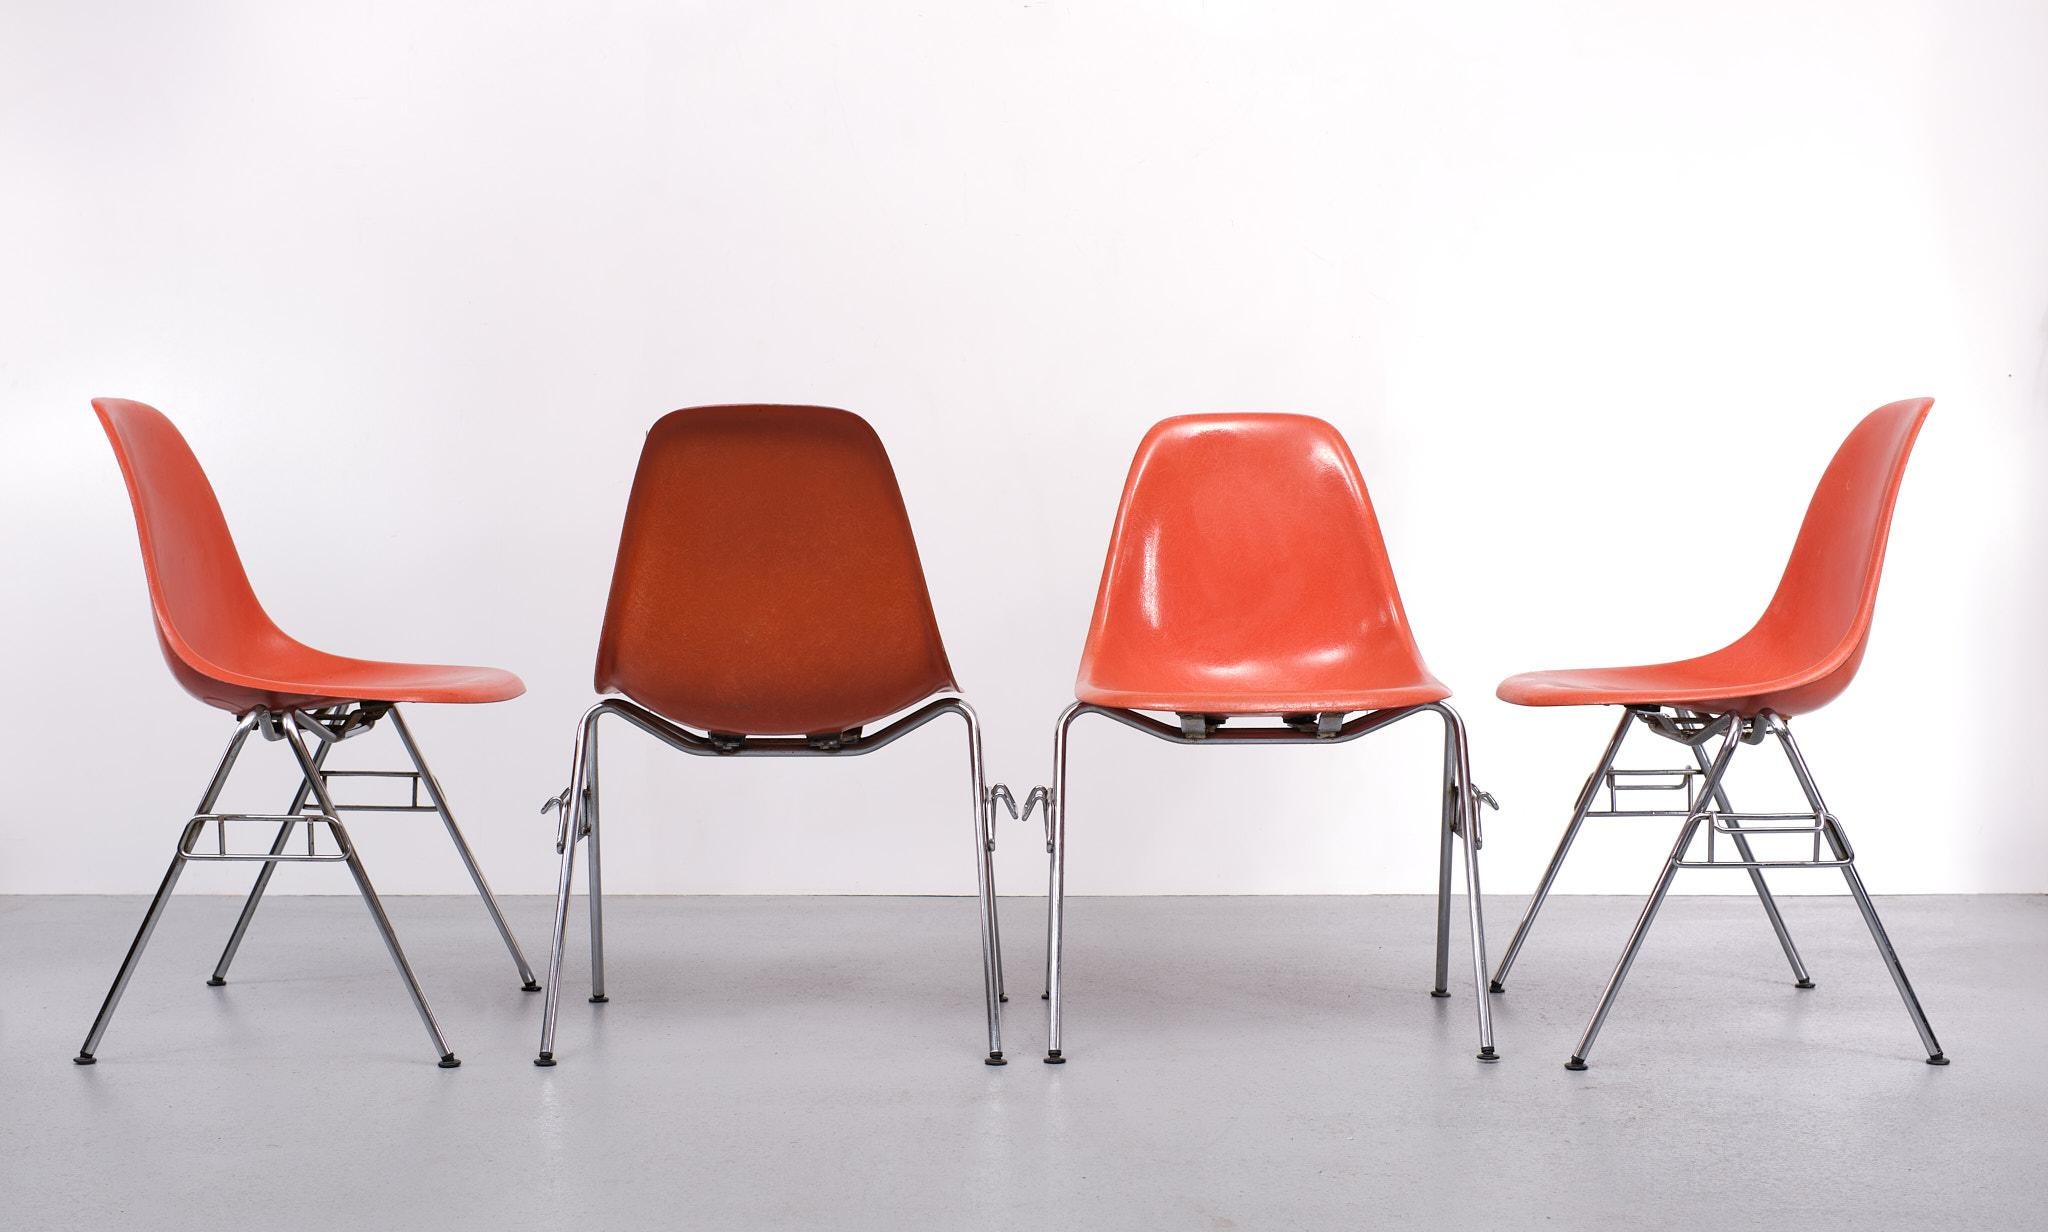 Fin du 20e siècle 4 chaises Charles & Ray Eames pour Herman Miller, 1974